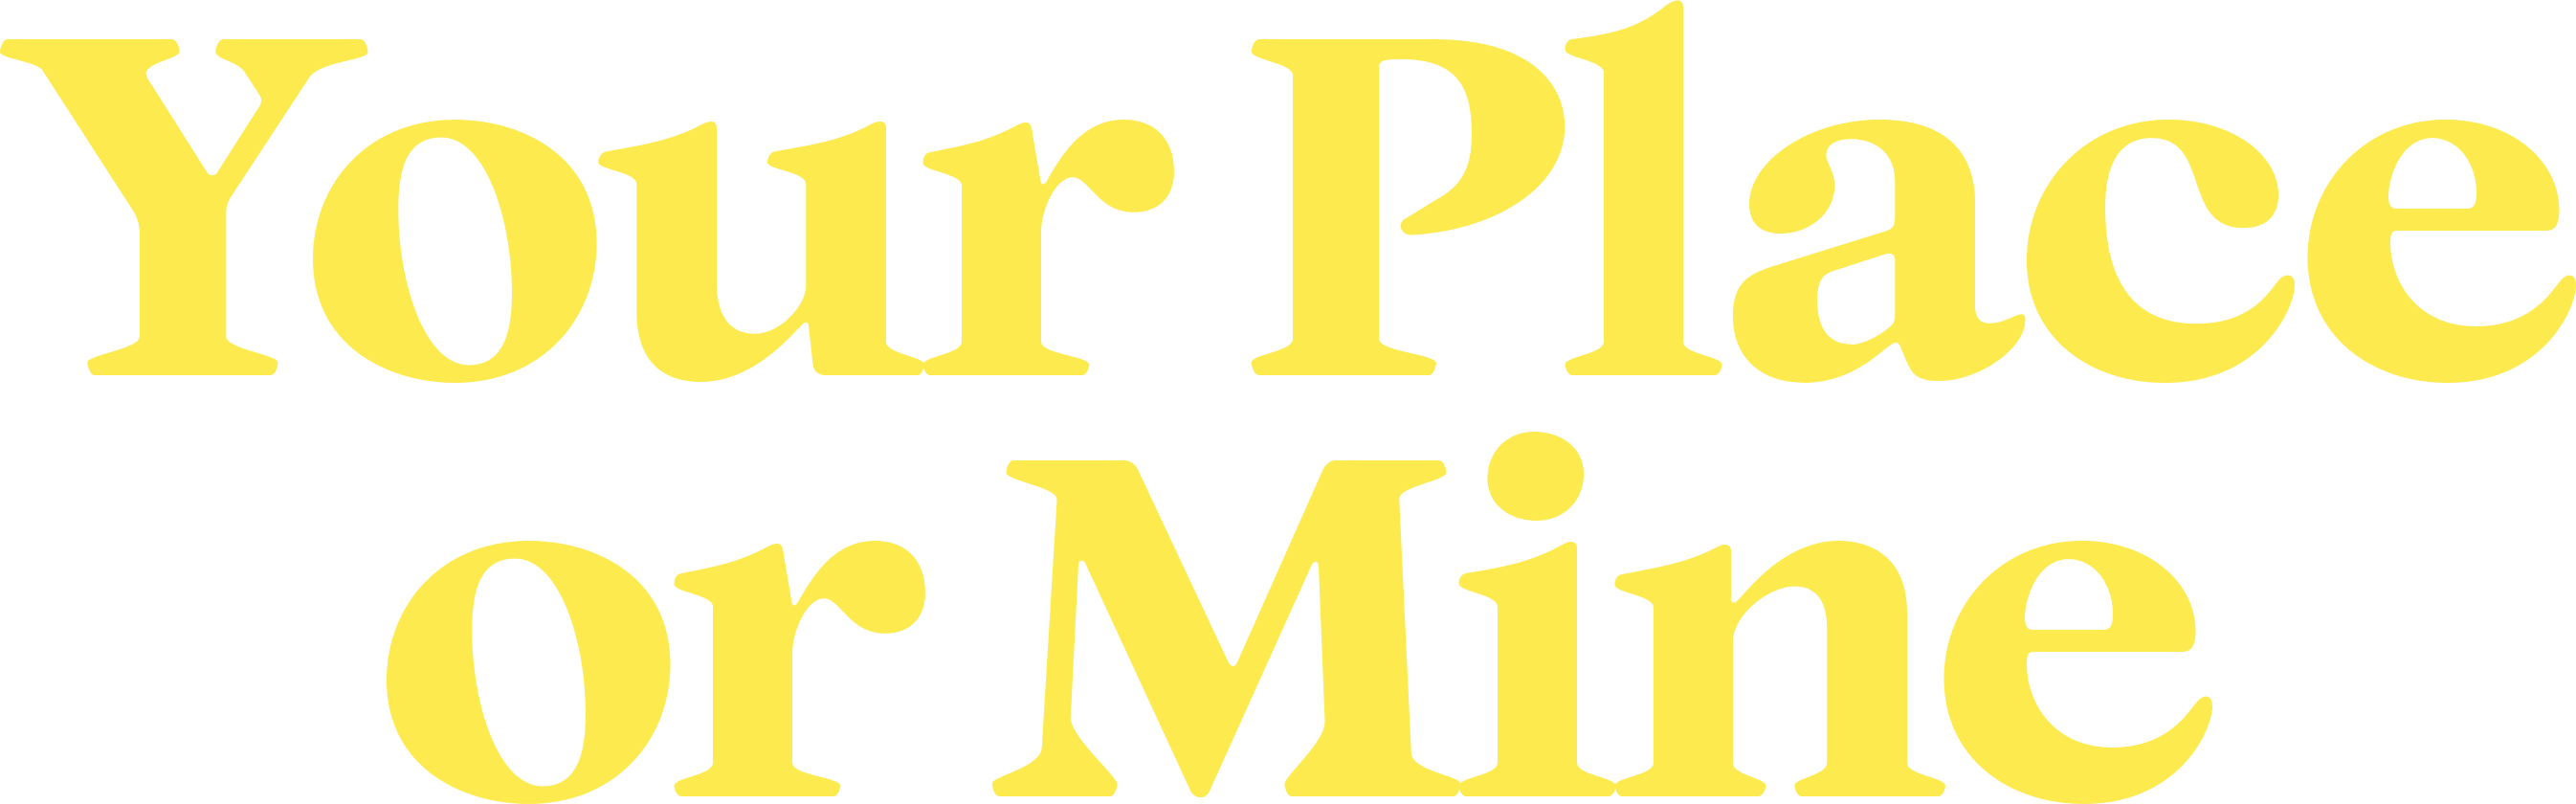 Your Place or Mine logo